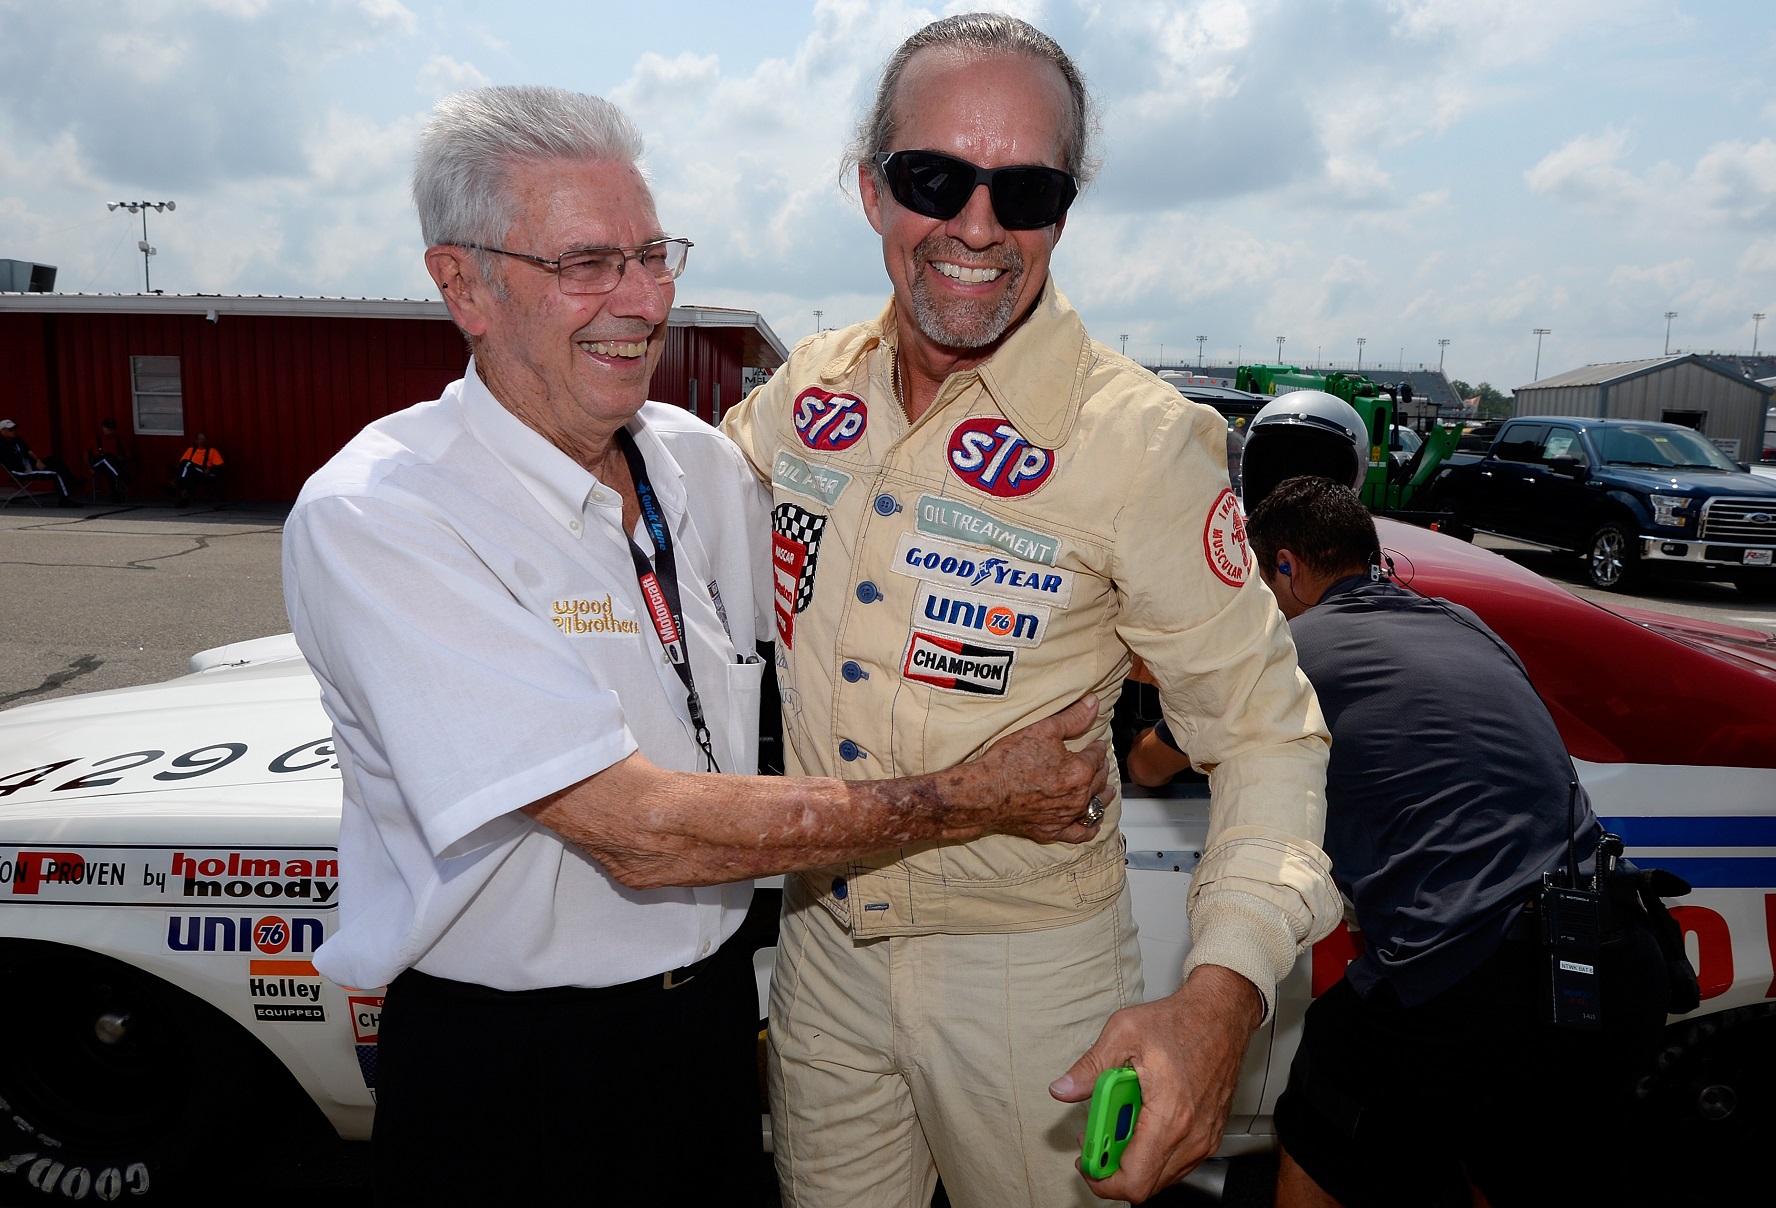 Kyle Petty and NASCAR Hall of Famer Leonard Wood stand with the Wood Brothers Racing 1972 Mercury prior to qualifying in the NASCAR Cup Series at Darlington in 2015.